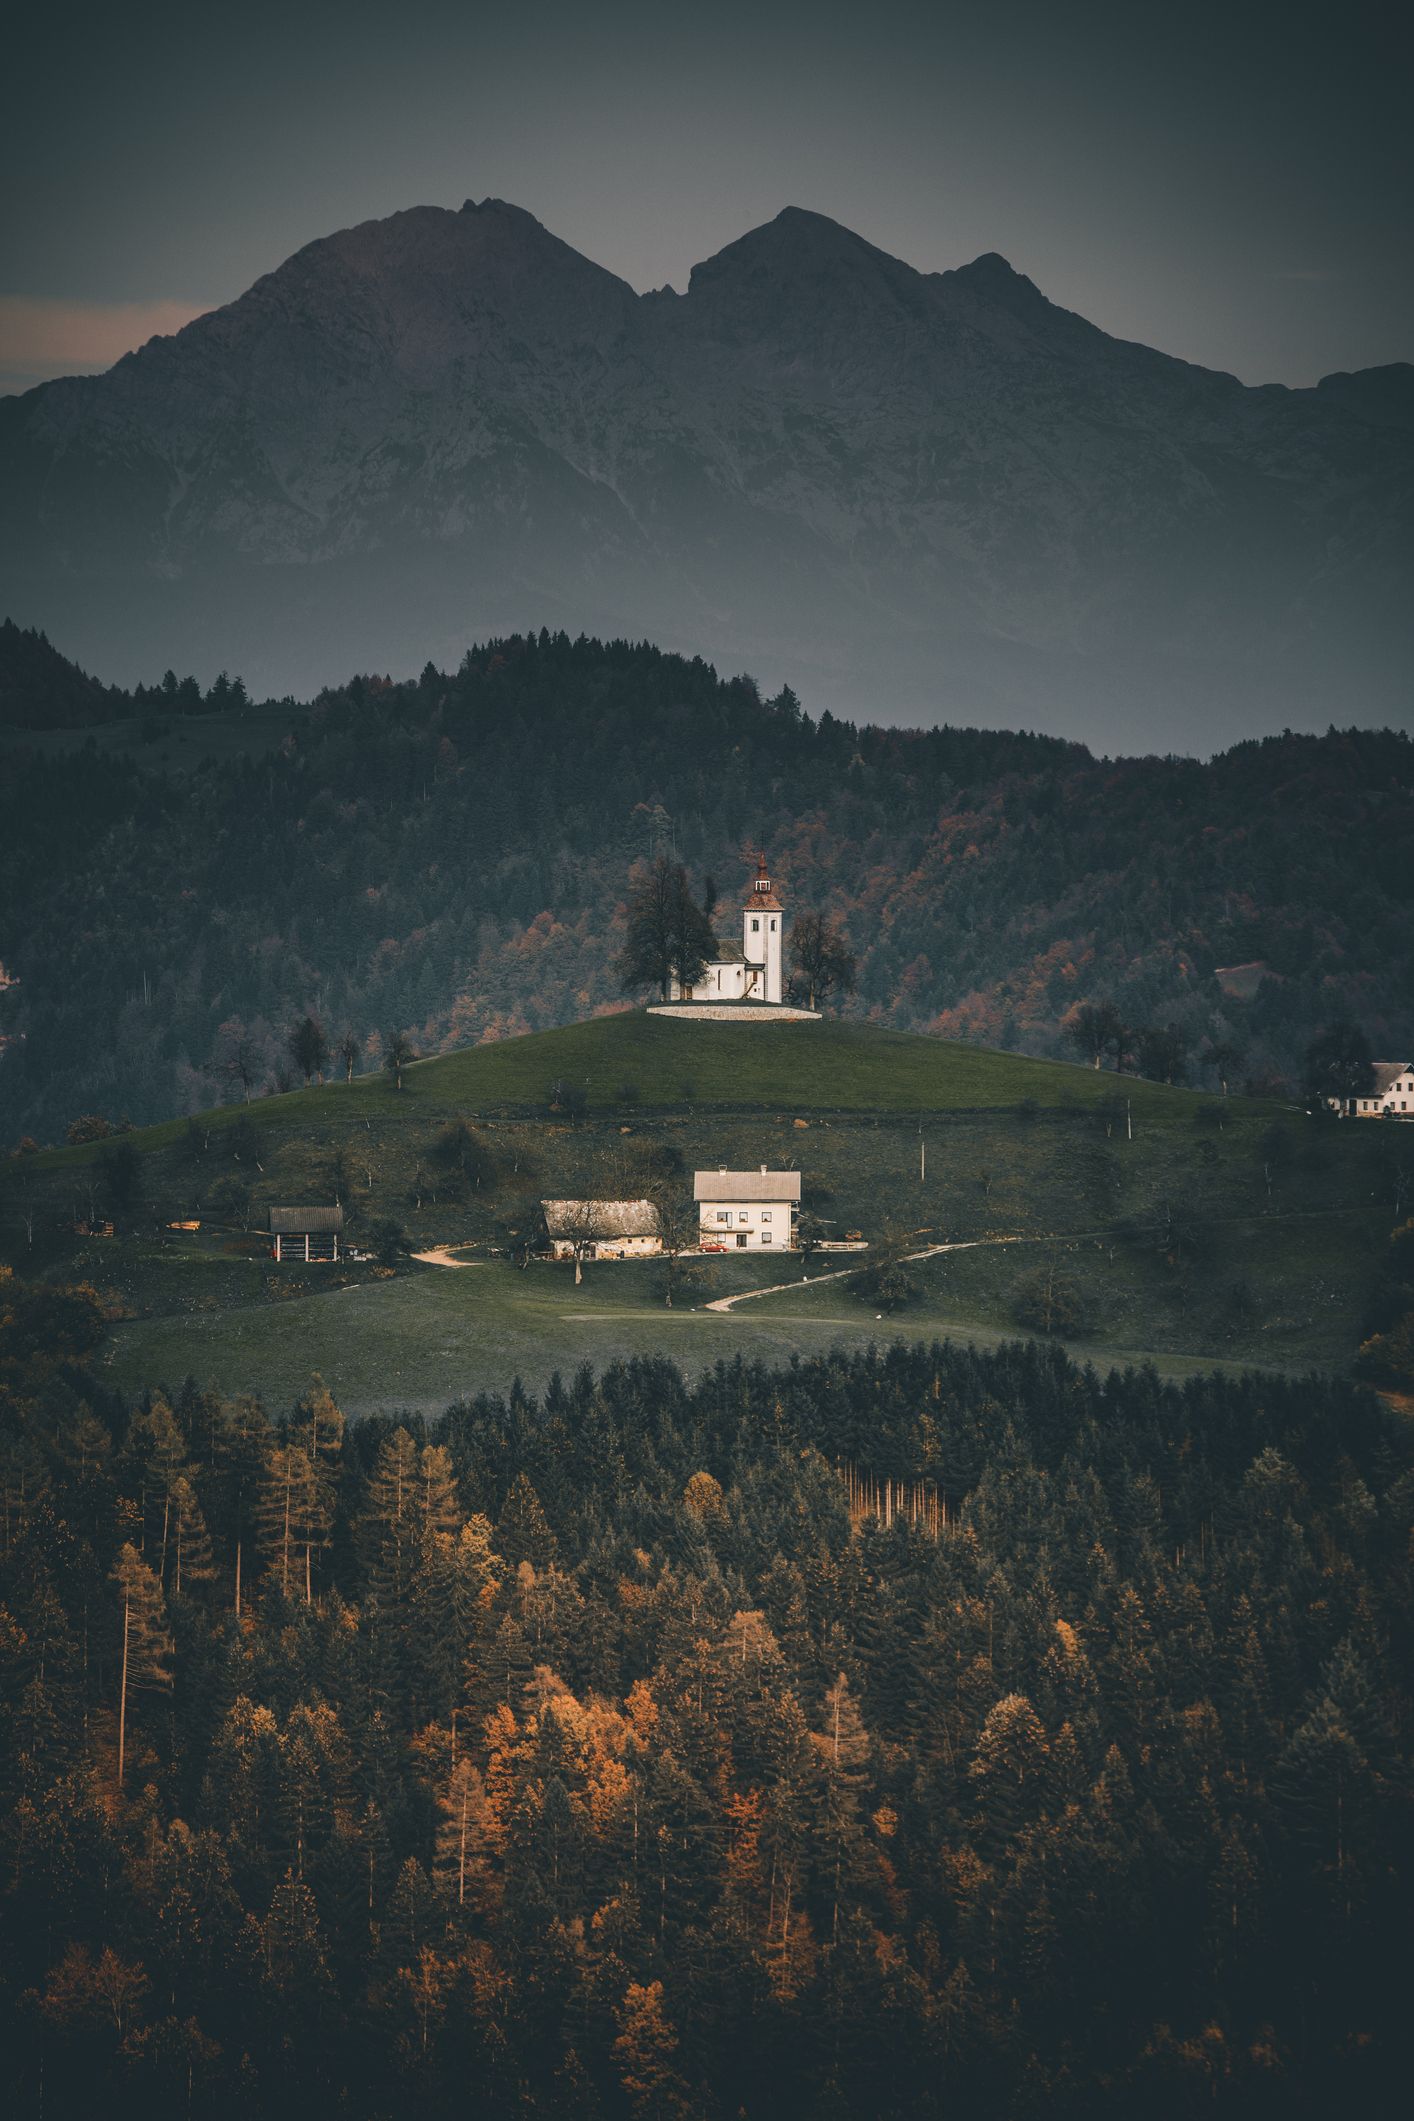 A church on top of a hill in the middle of a forest with mountains in the background.